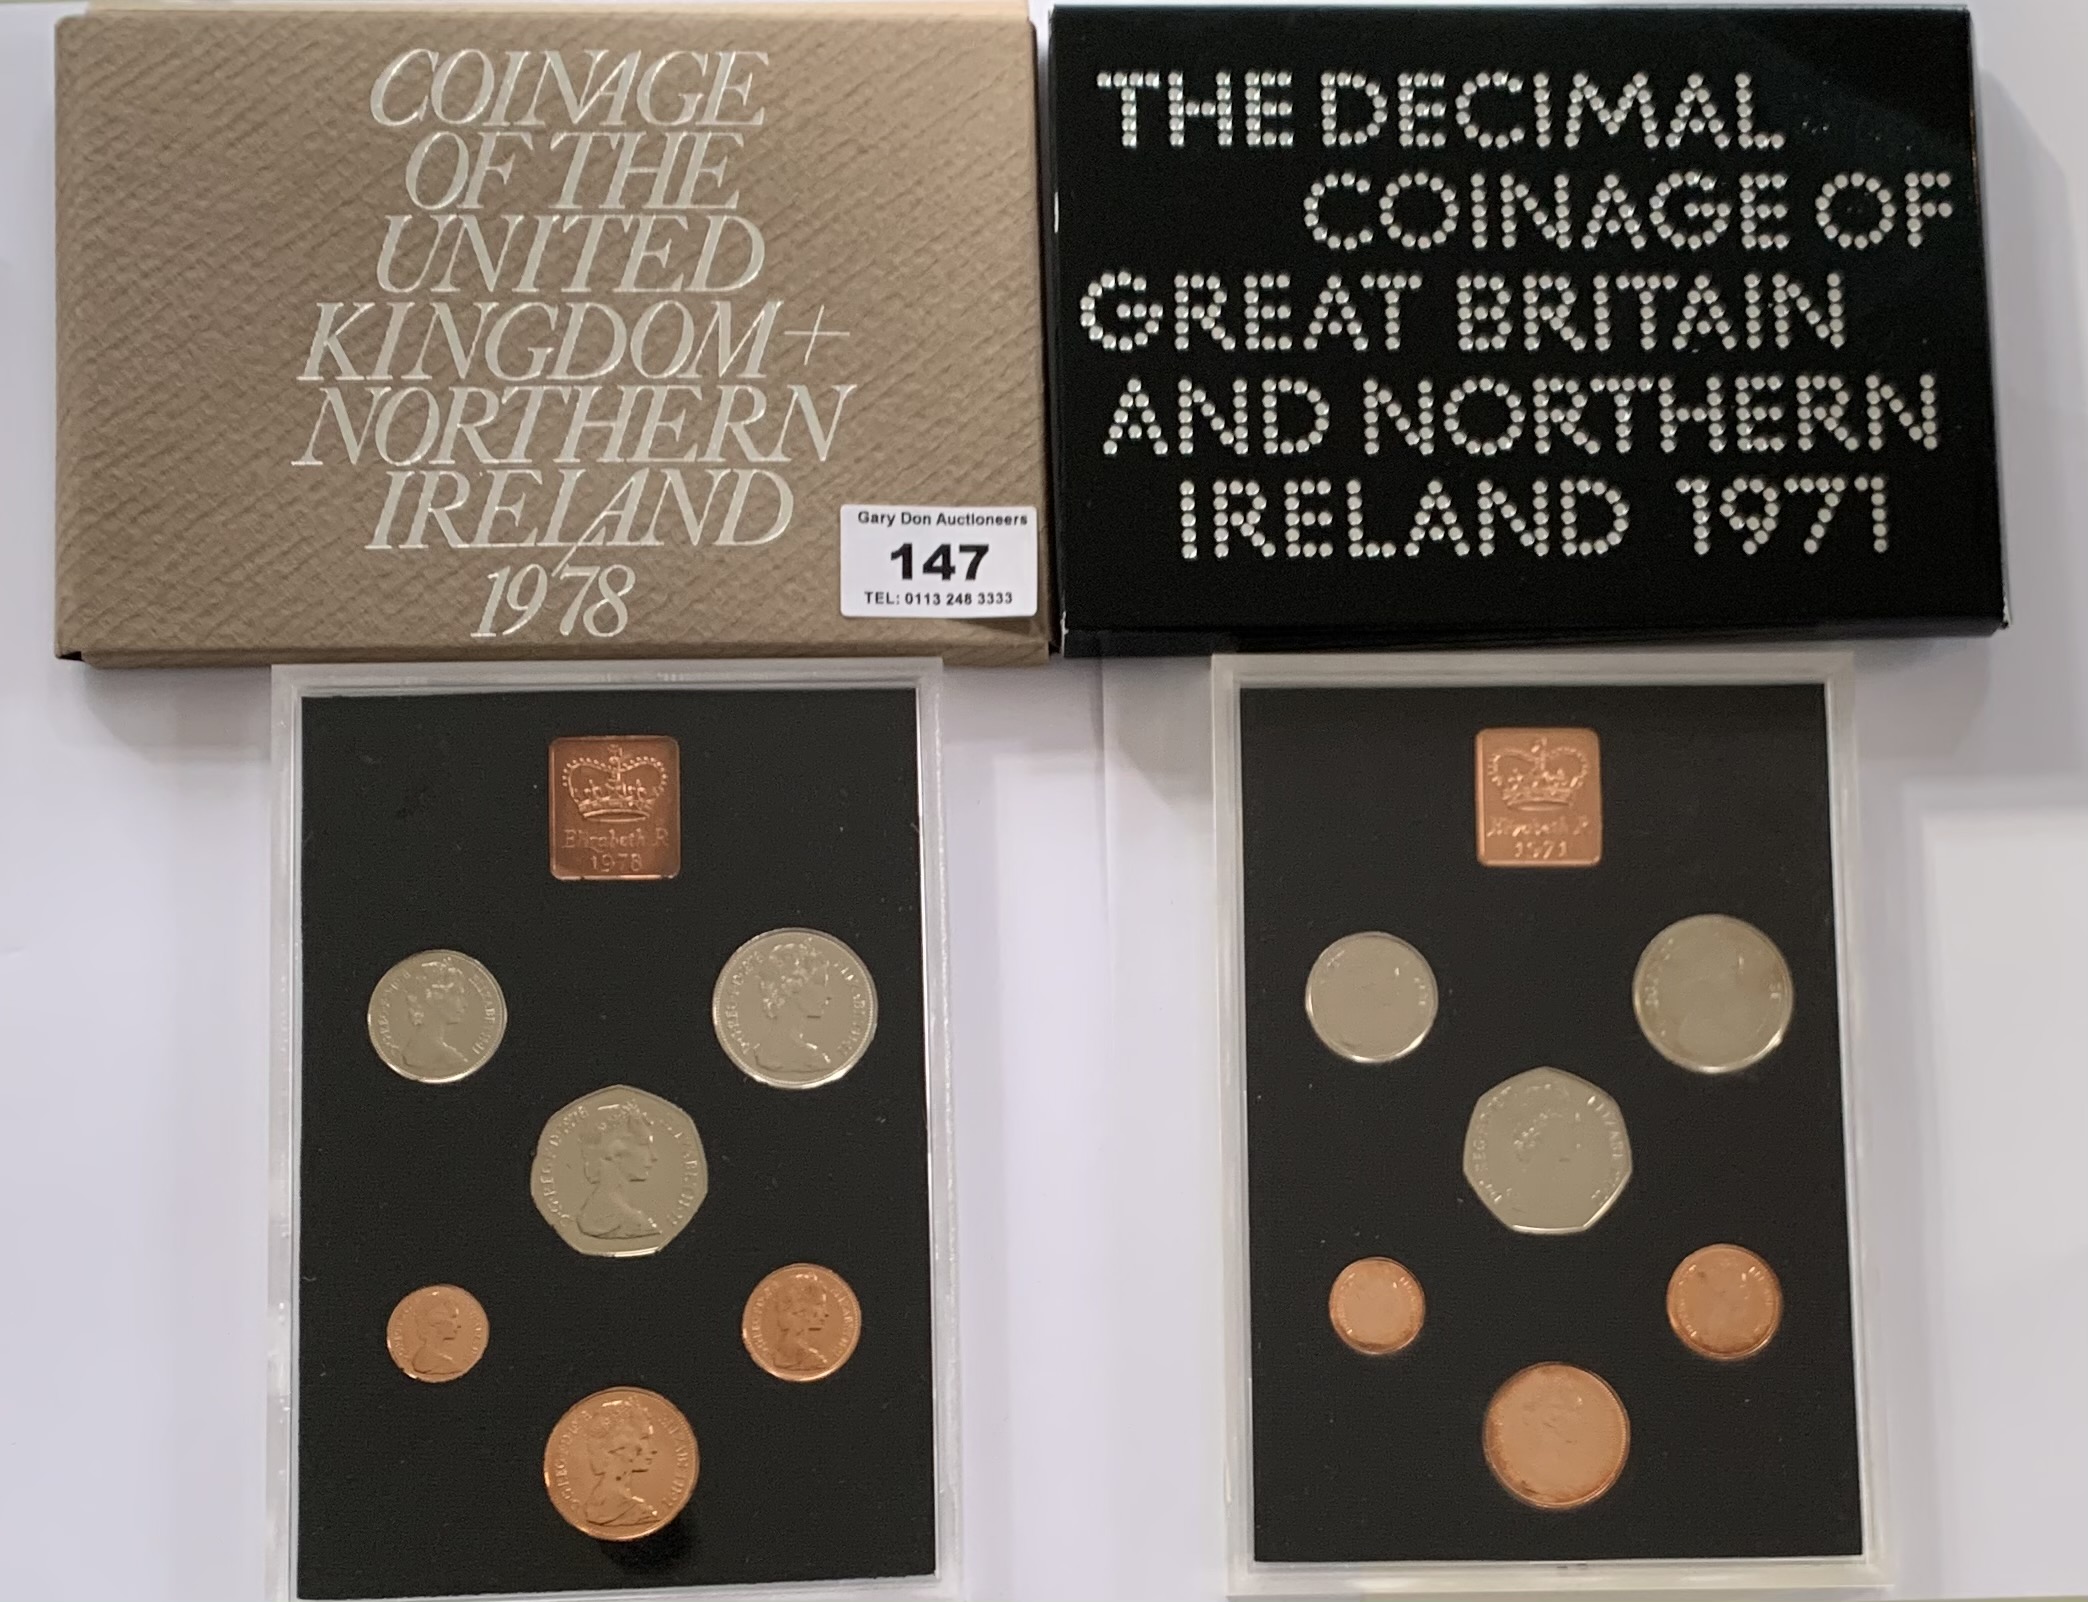 The Decimal Coinage of Great Britain and Northern Ireland 1971 and Coinage of the United Kingdom and